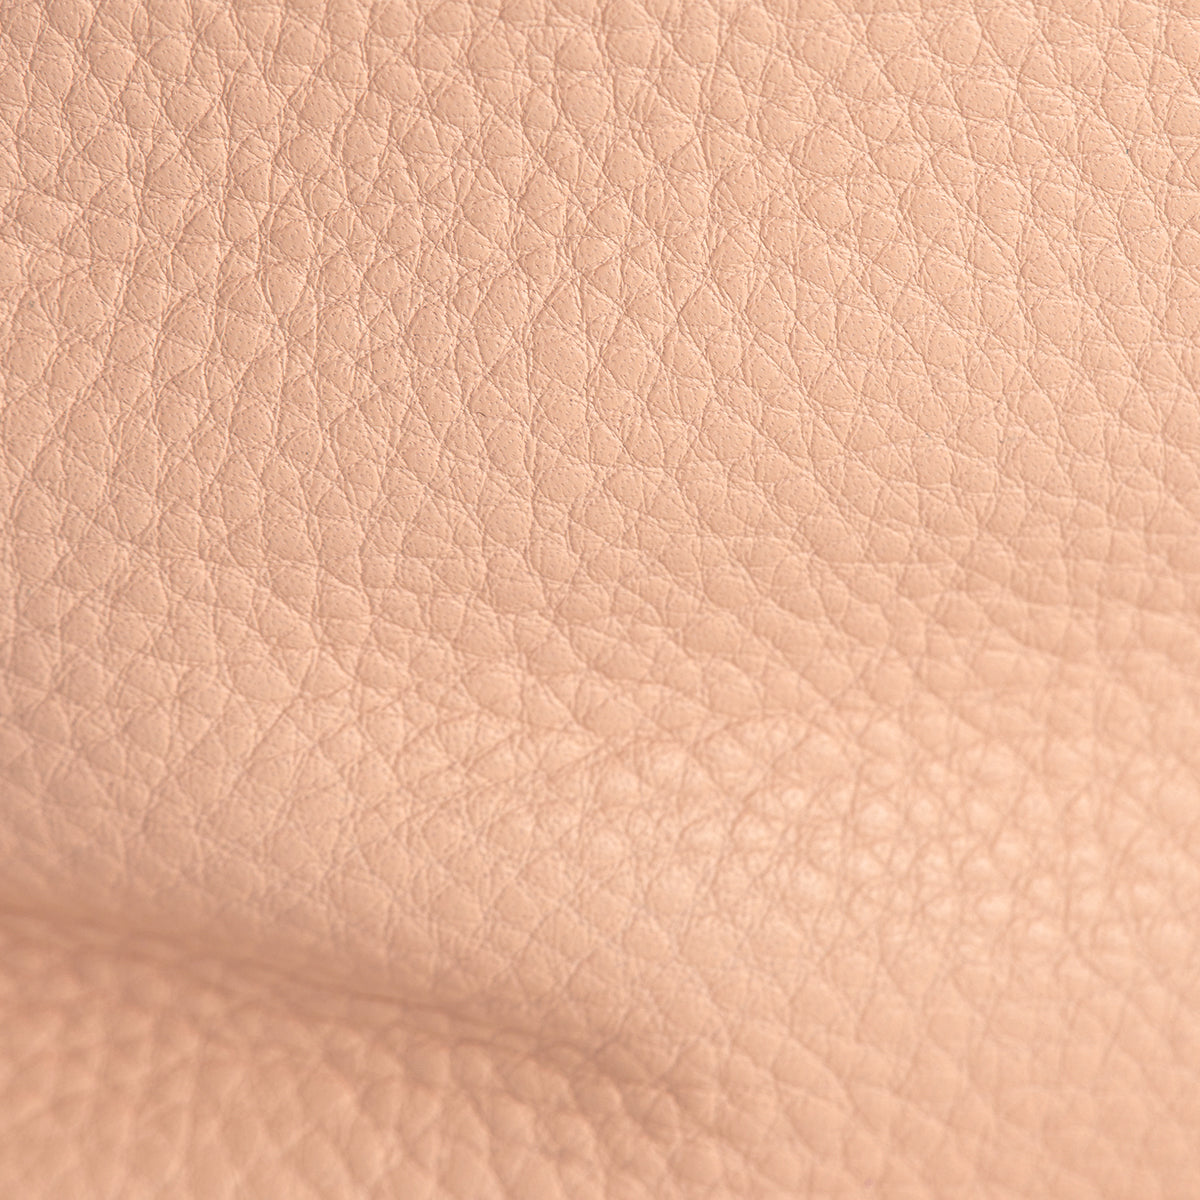 Morgan-Champagne-Pink-Pebble-Leather-Swatch